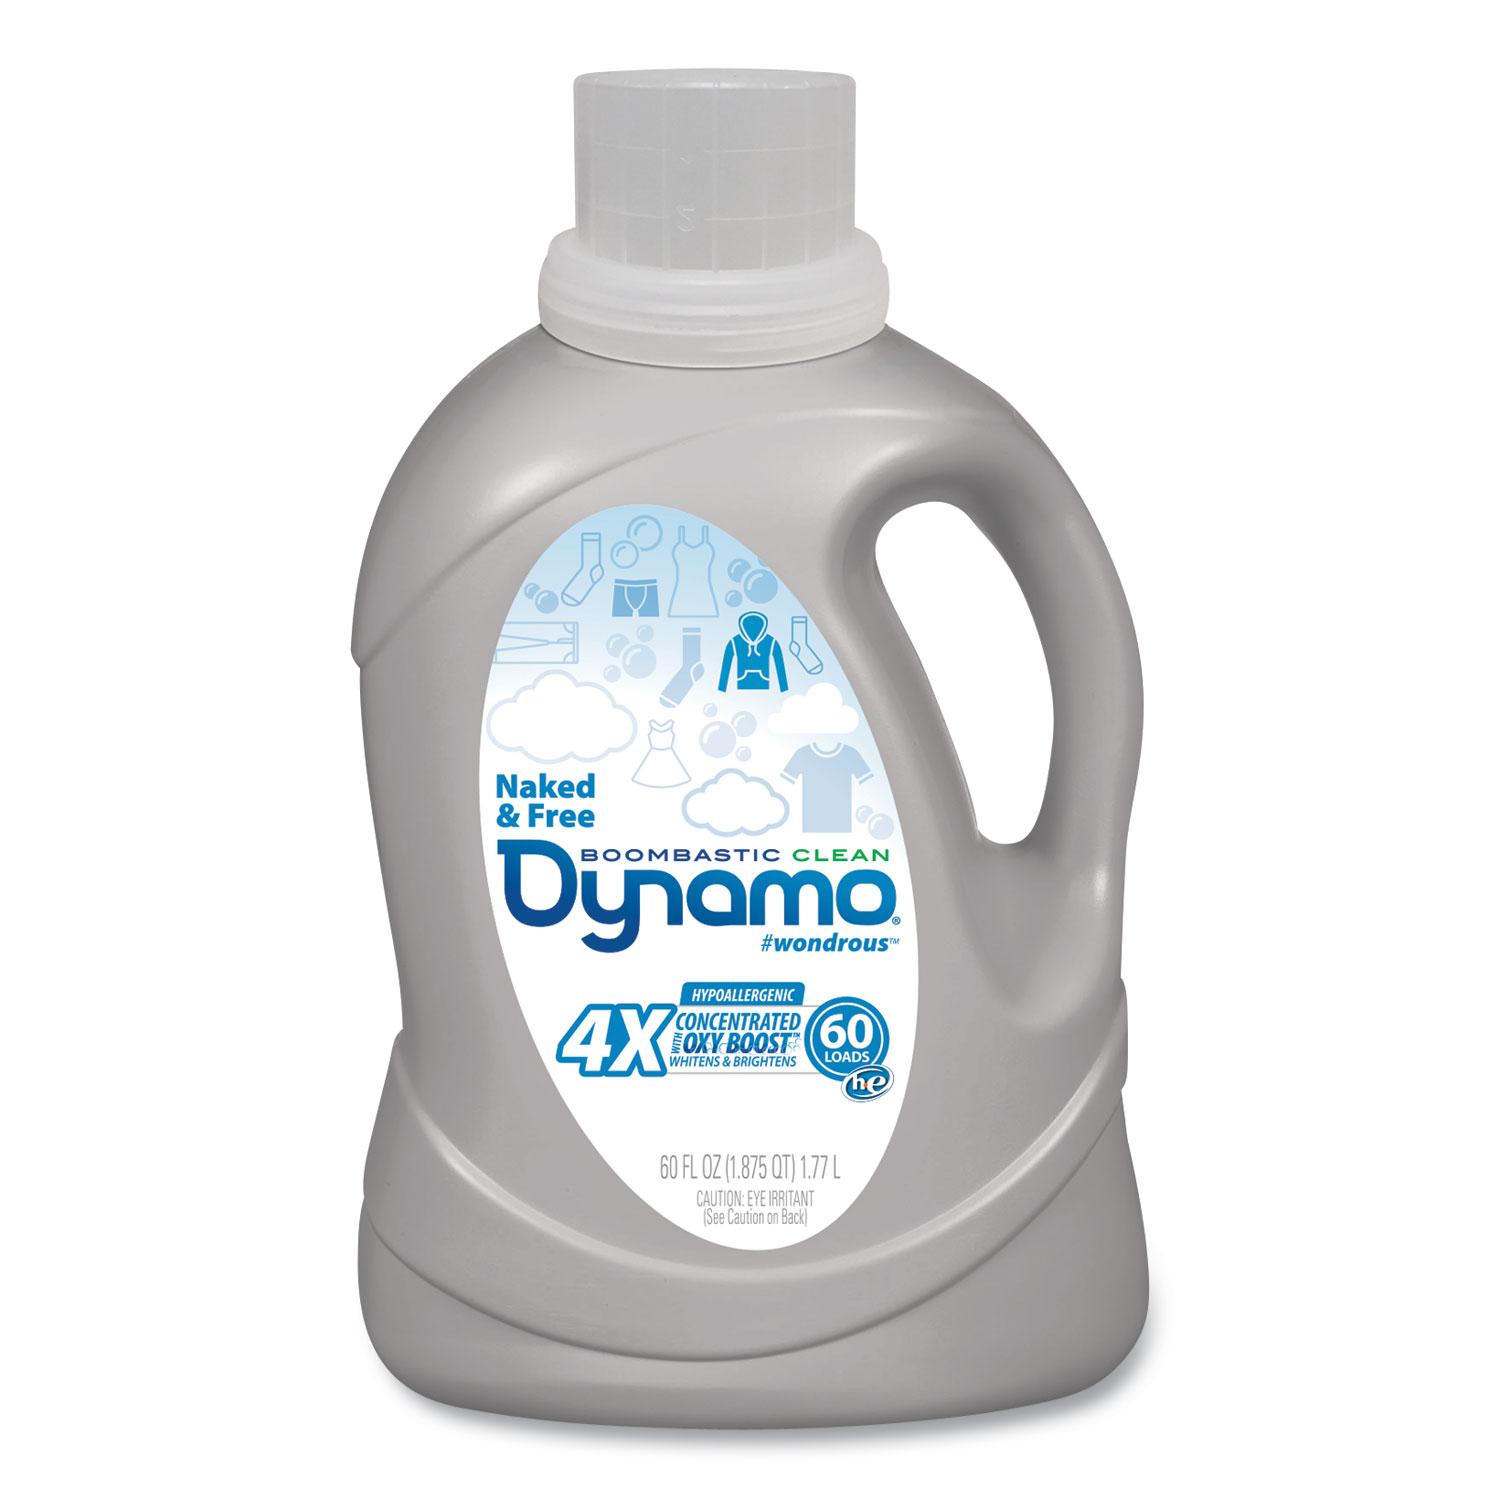  Dynamo DYNMO23 Naked and Free Laundry Detergent, 60 oz Bottle, 6/Carton (PBCDYNMO23) 